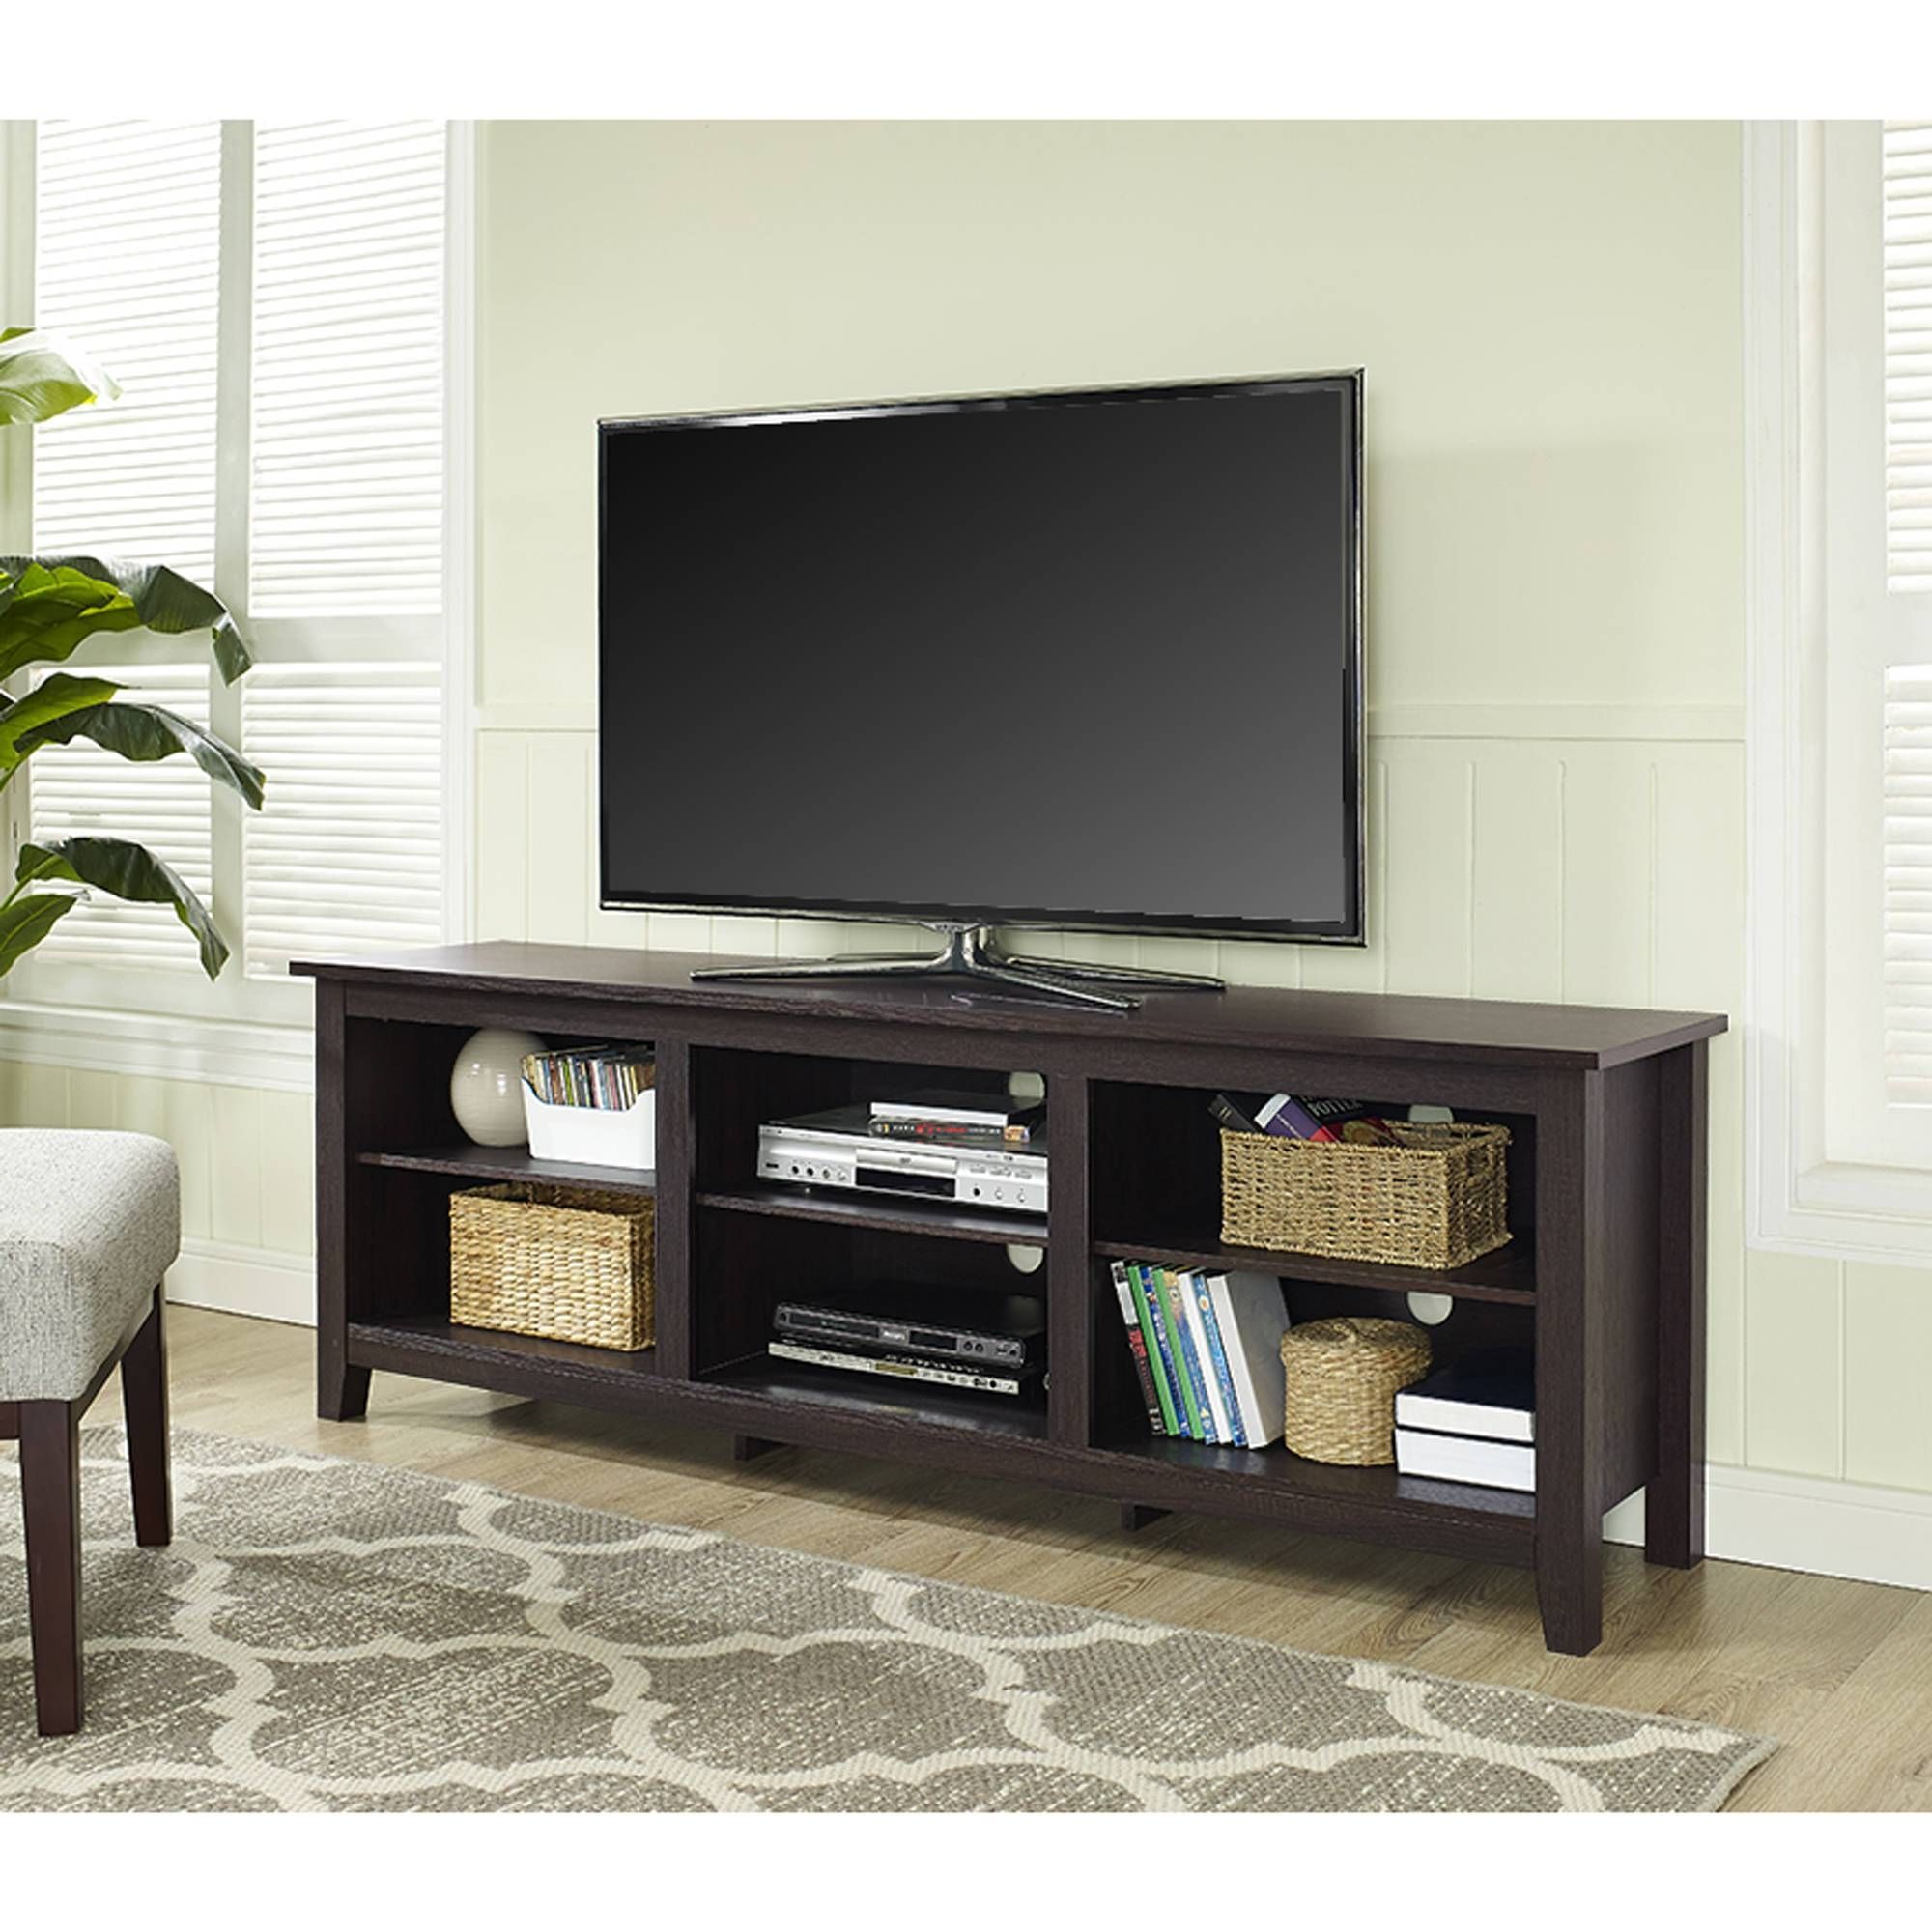 Altra Bailey 72" Espresso Tv Stand For Tv's Up To 72" – Walmart In 24 Inch Wide Tv Stands (Photo 1 of 15)